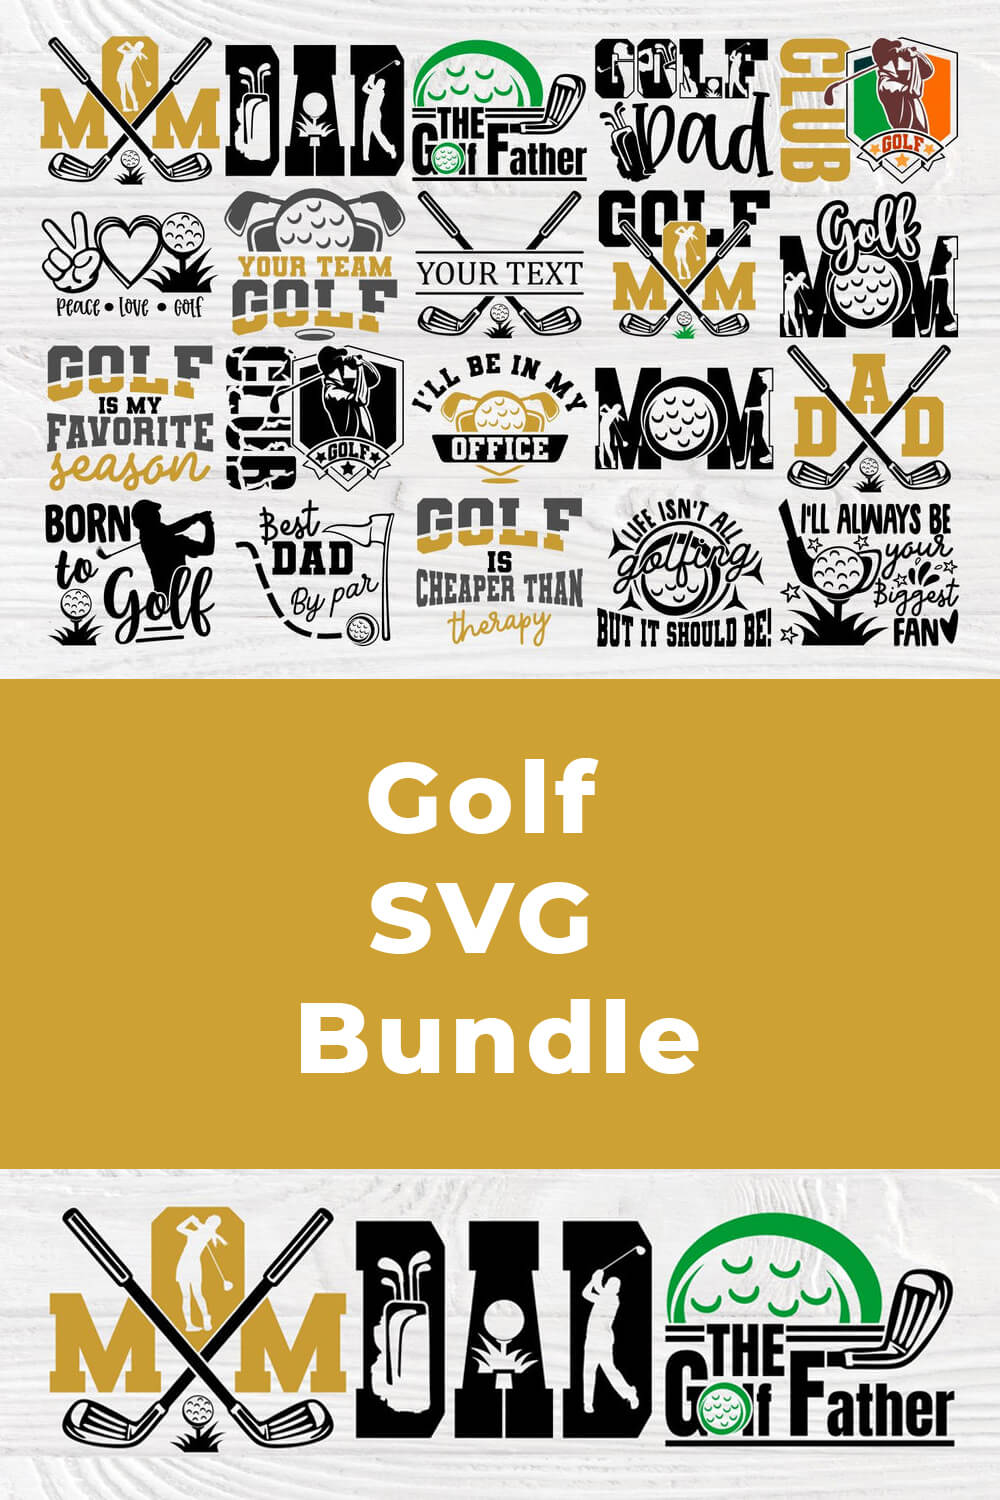 Life isn't all golfing but it should be SVG Bundle.